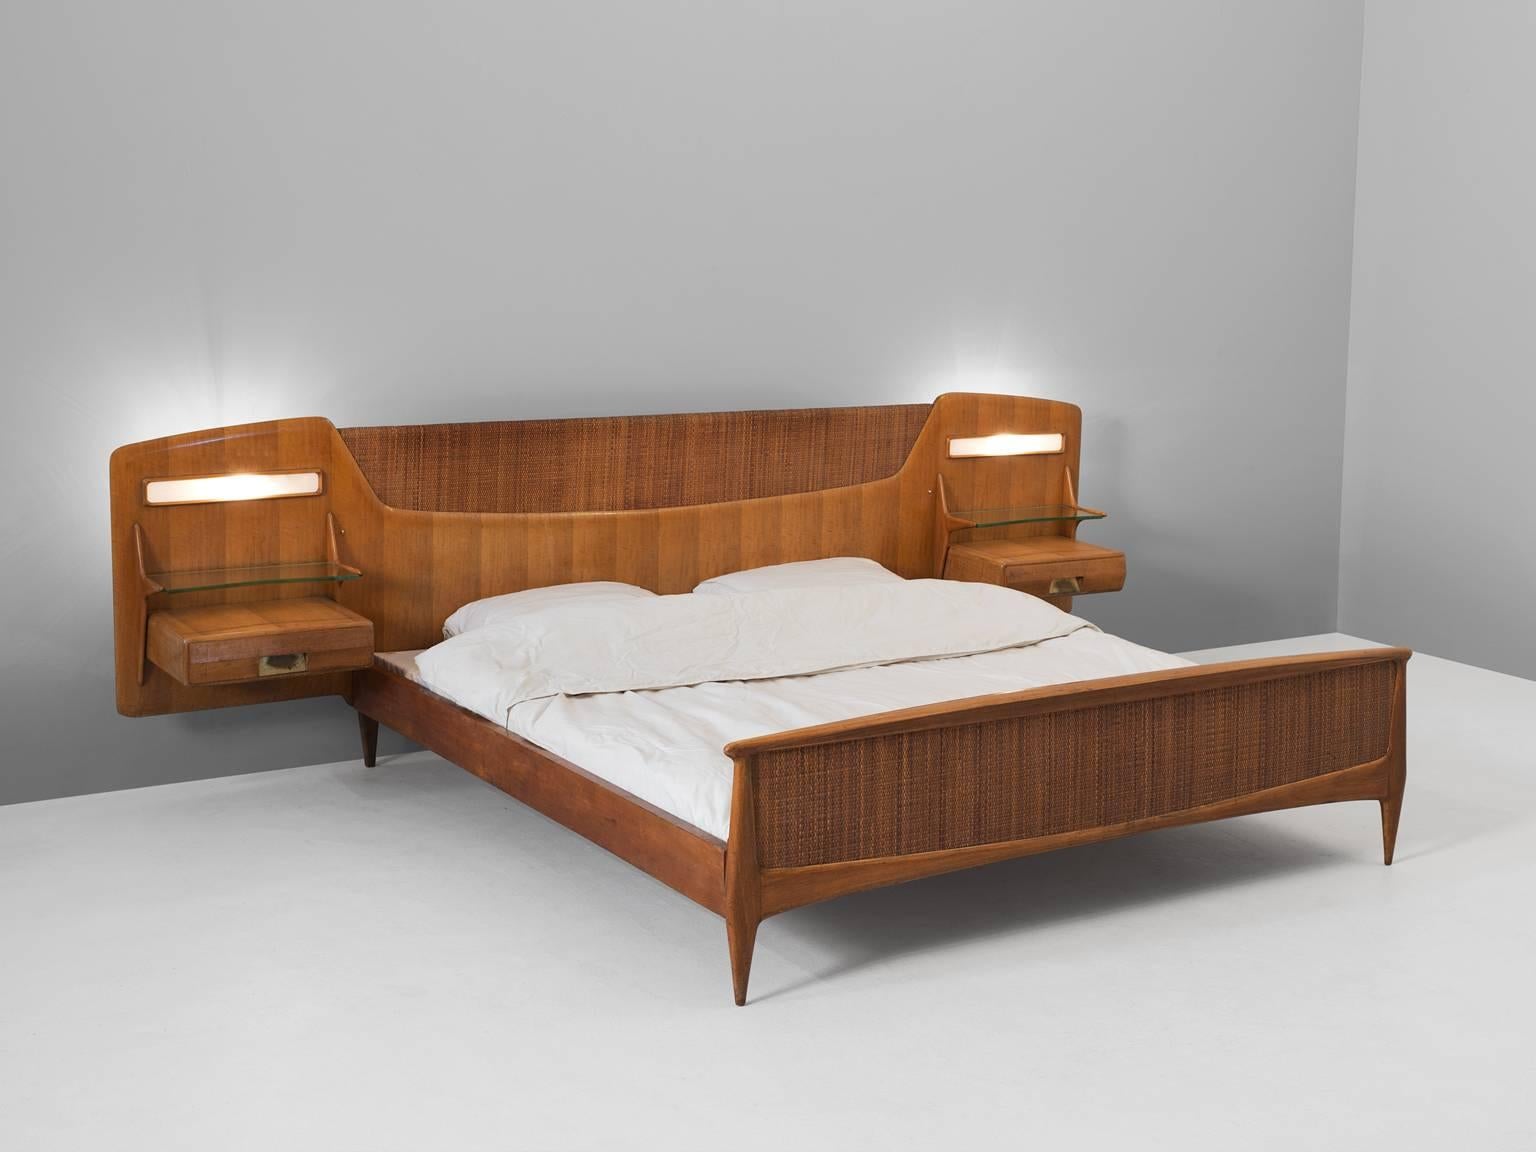 Double bed, in birch, cane and glass, Italy, 1950s. 

Mid century modern illuminated bed with floating nightstands and lights. The head shows beautiful shapes, which are repeated in the beds frame. The nightstands have a drawer and glass shelve.